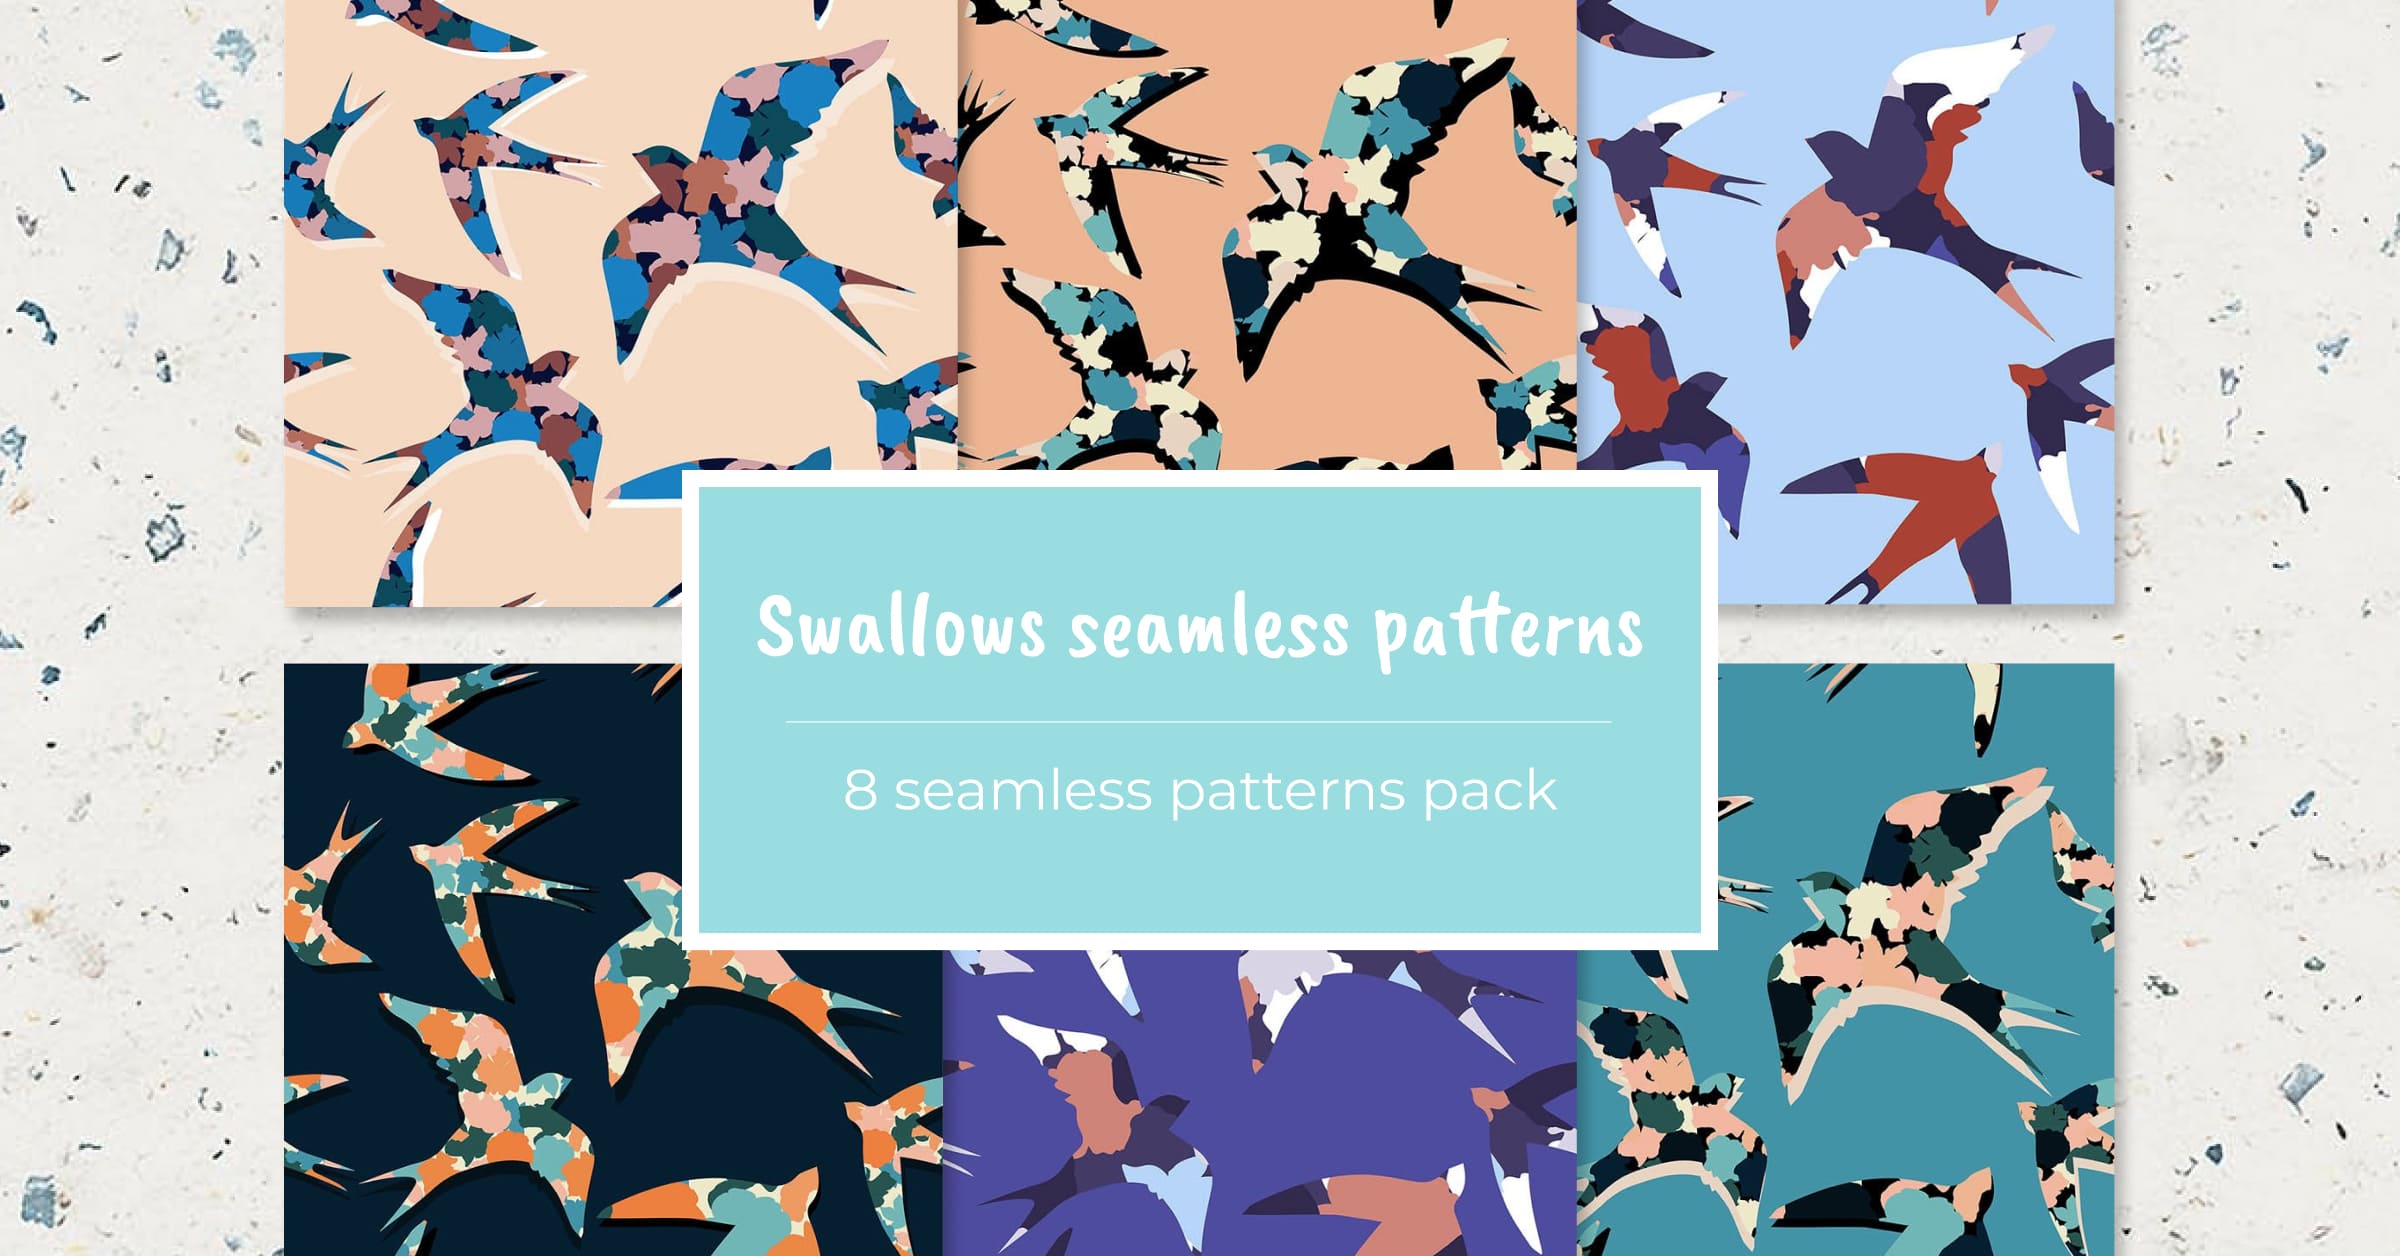 Swallows seamless patterns - Facebook page preview.